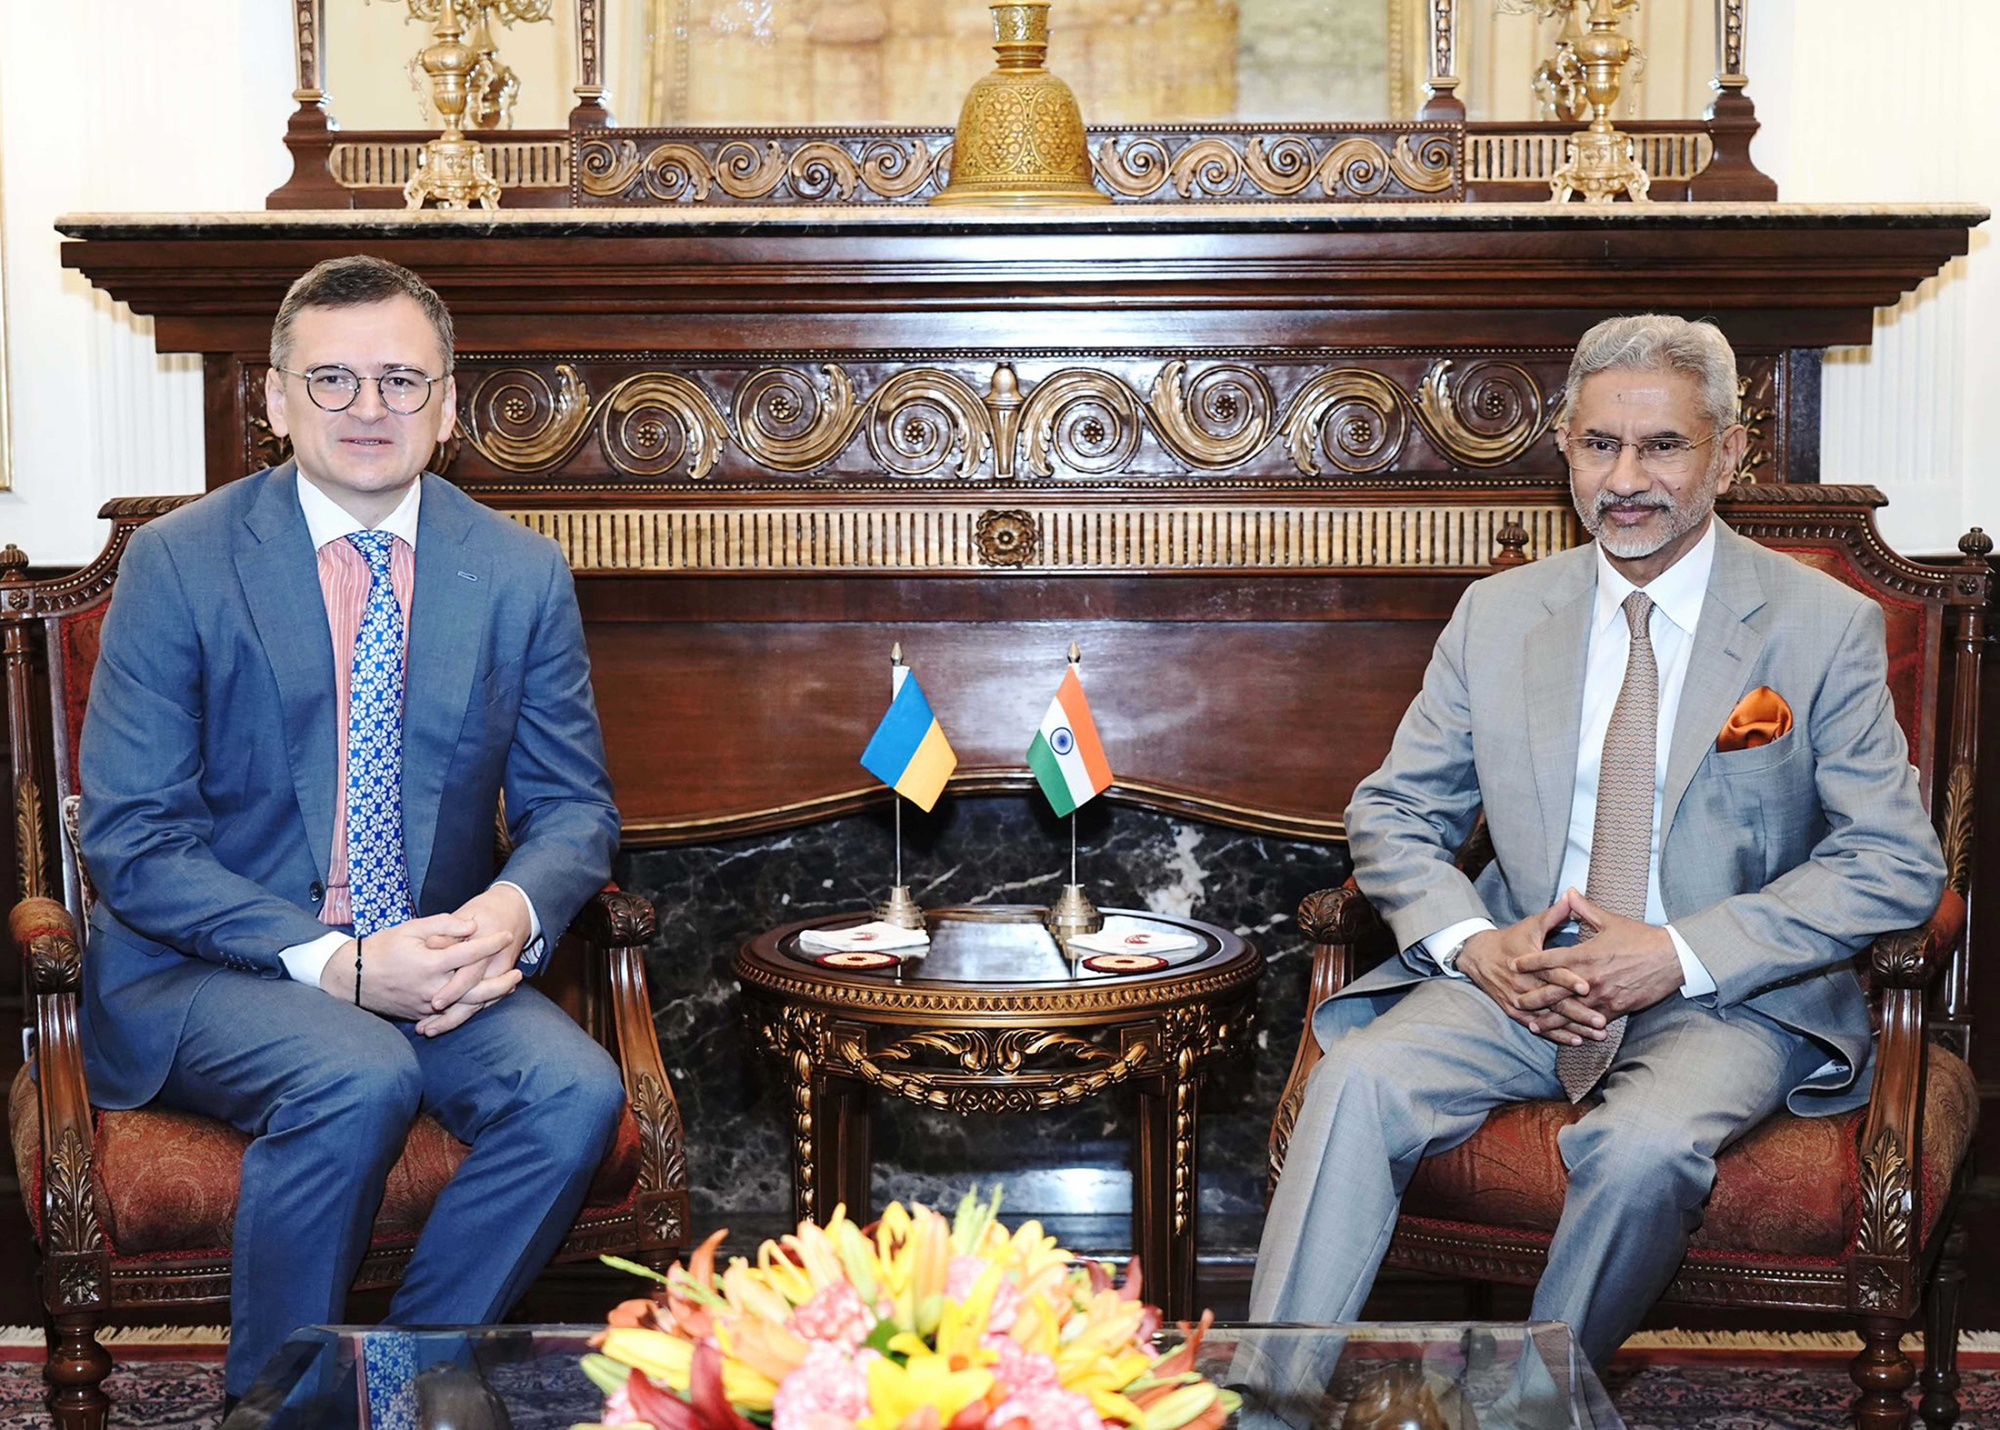 Ukraine Foreign Minister Dmytro Kuleba discusses peace plan in India meeting